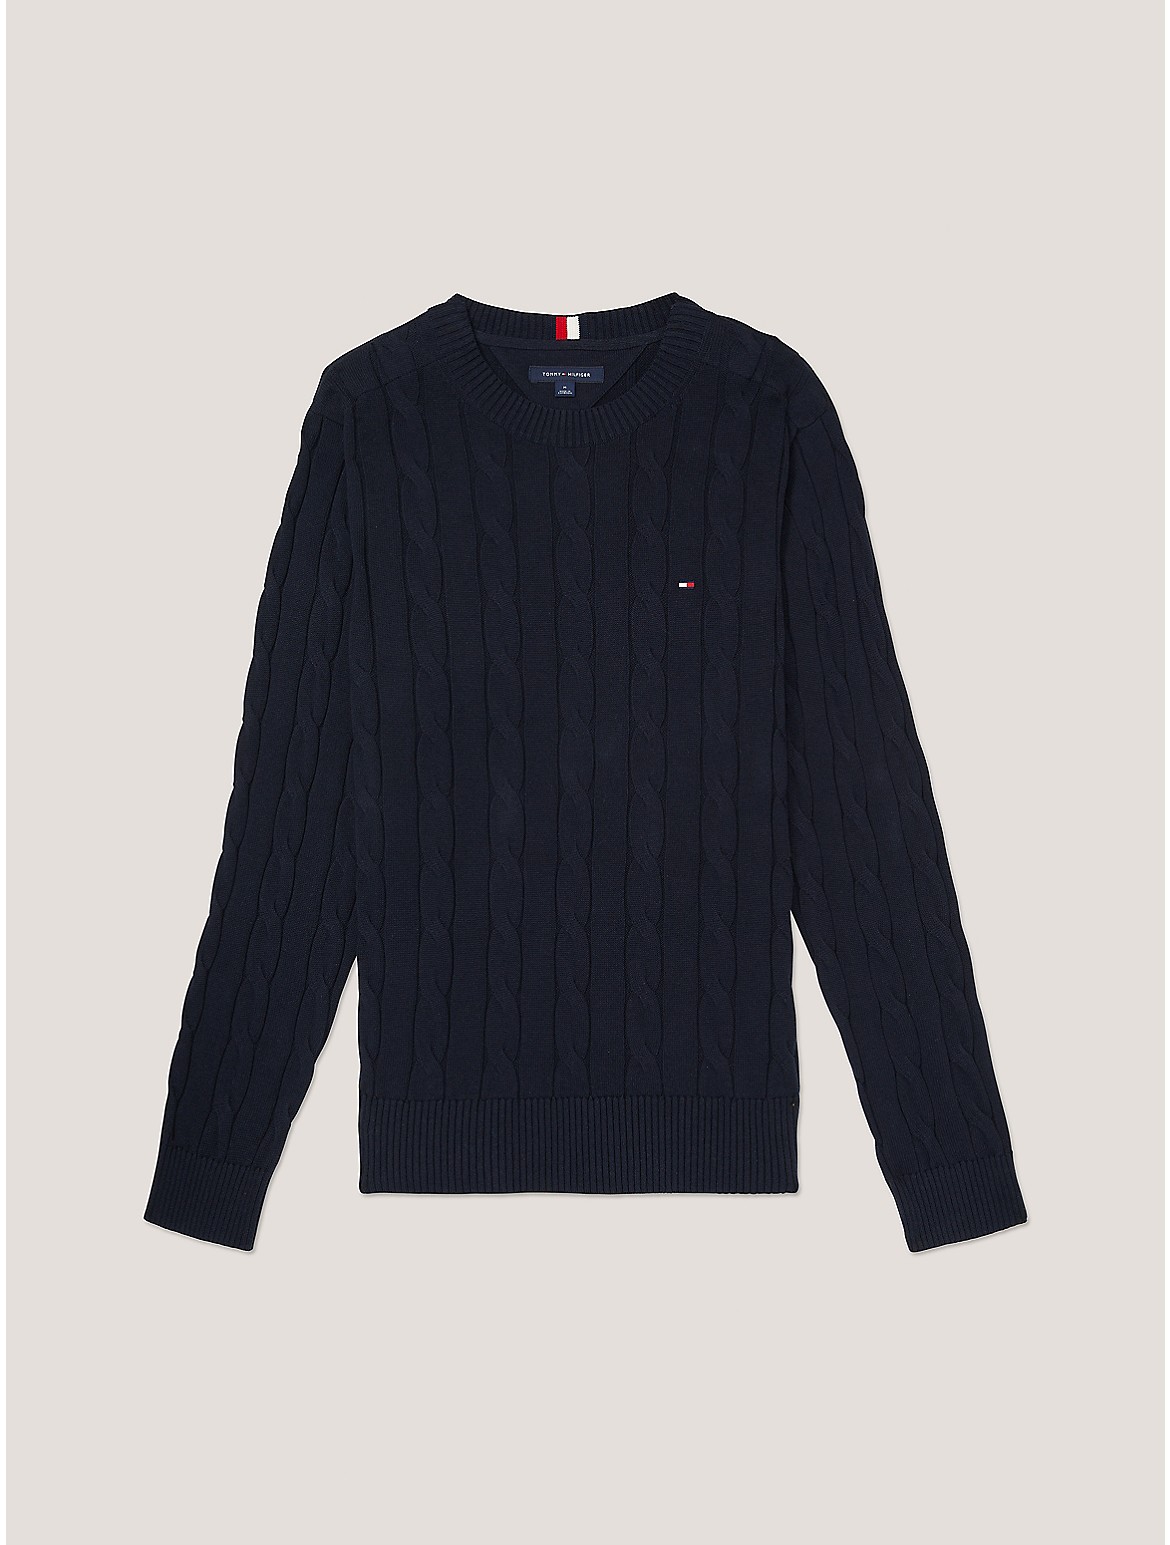 Tommy Hilfiger Men's Cable Knit Sweater